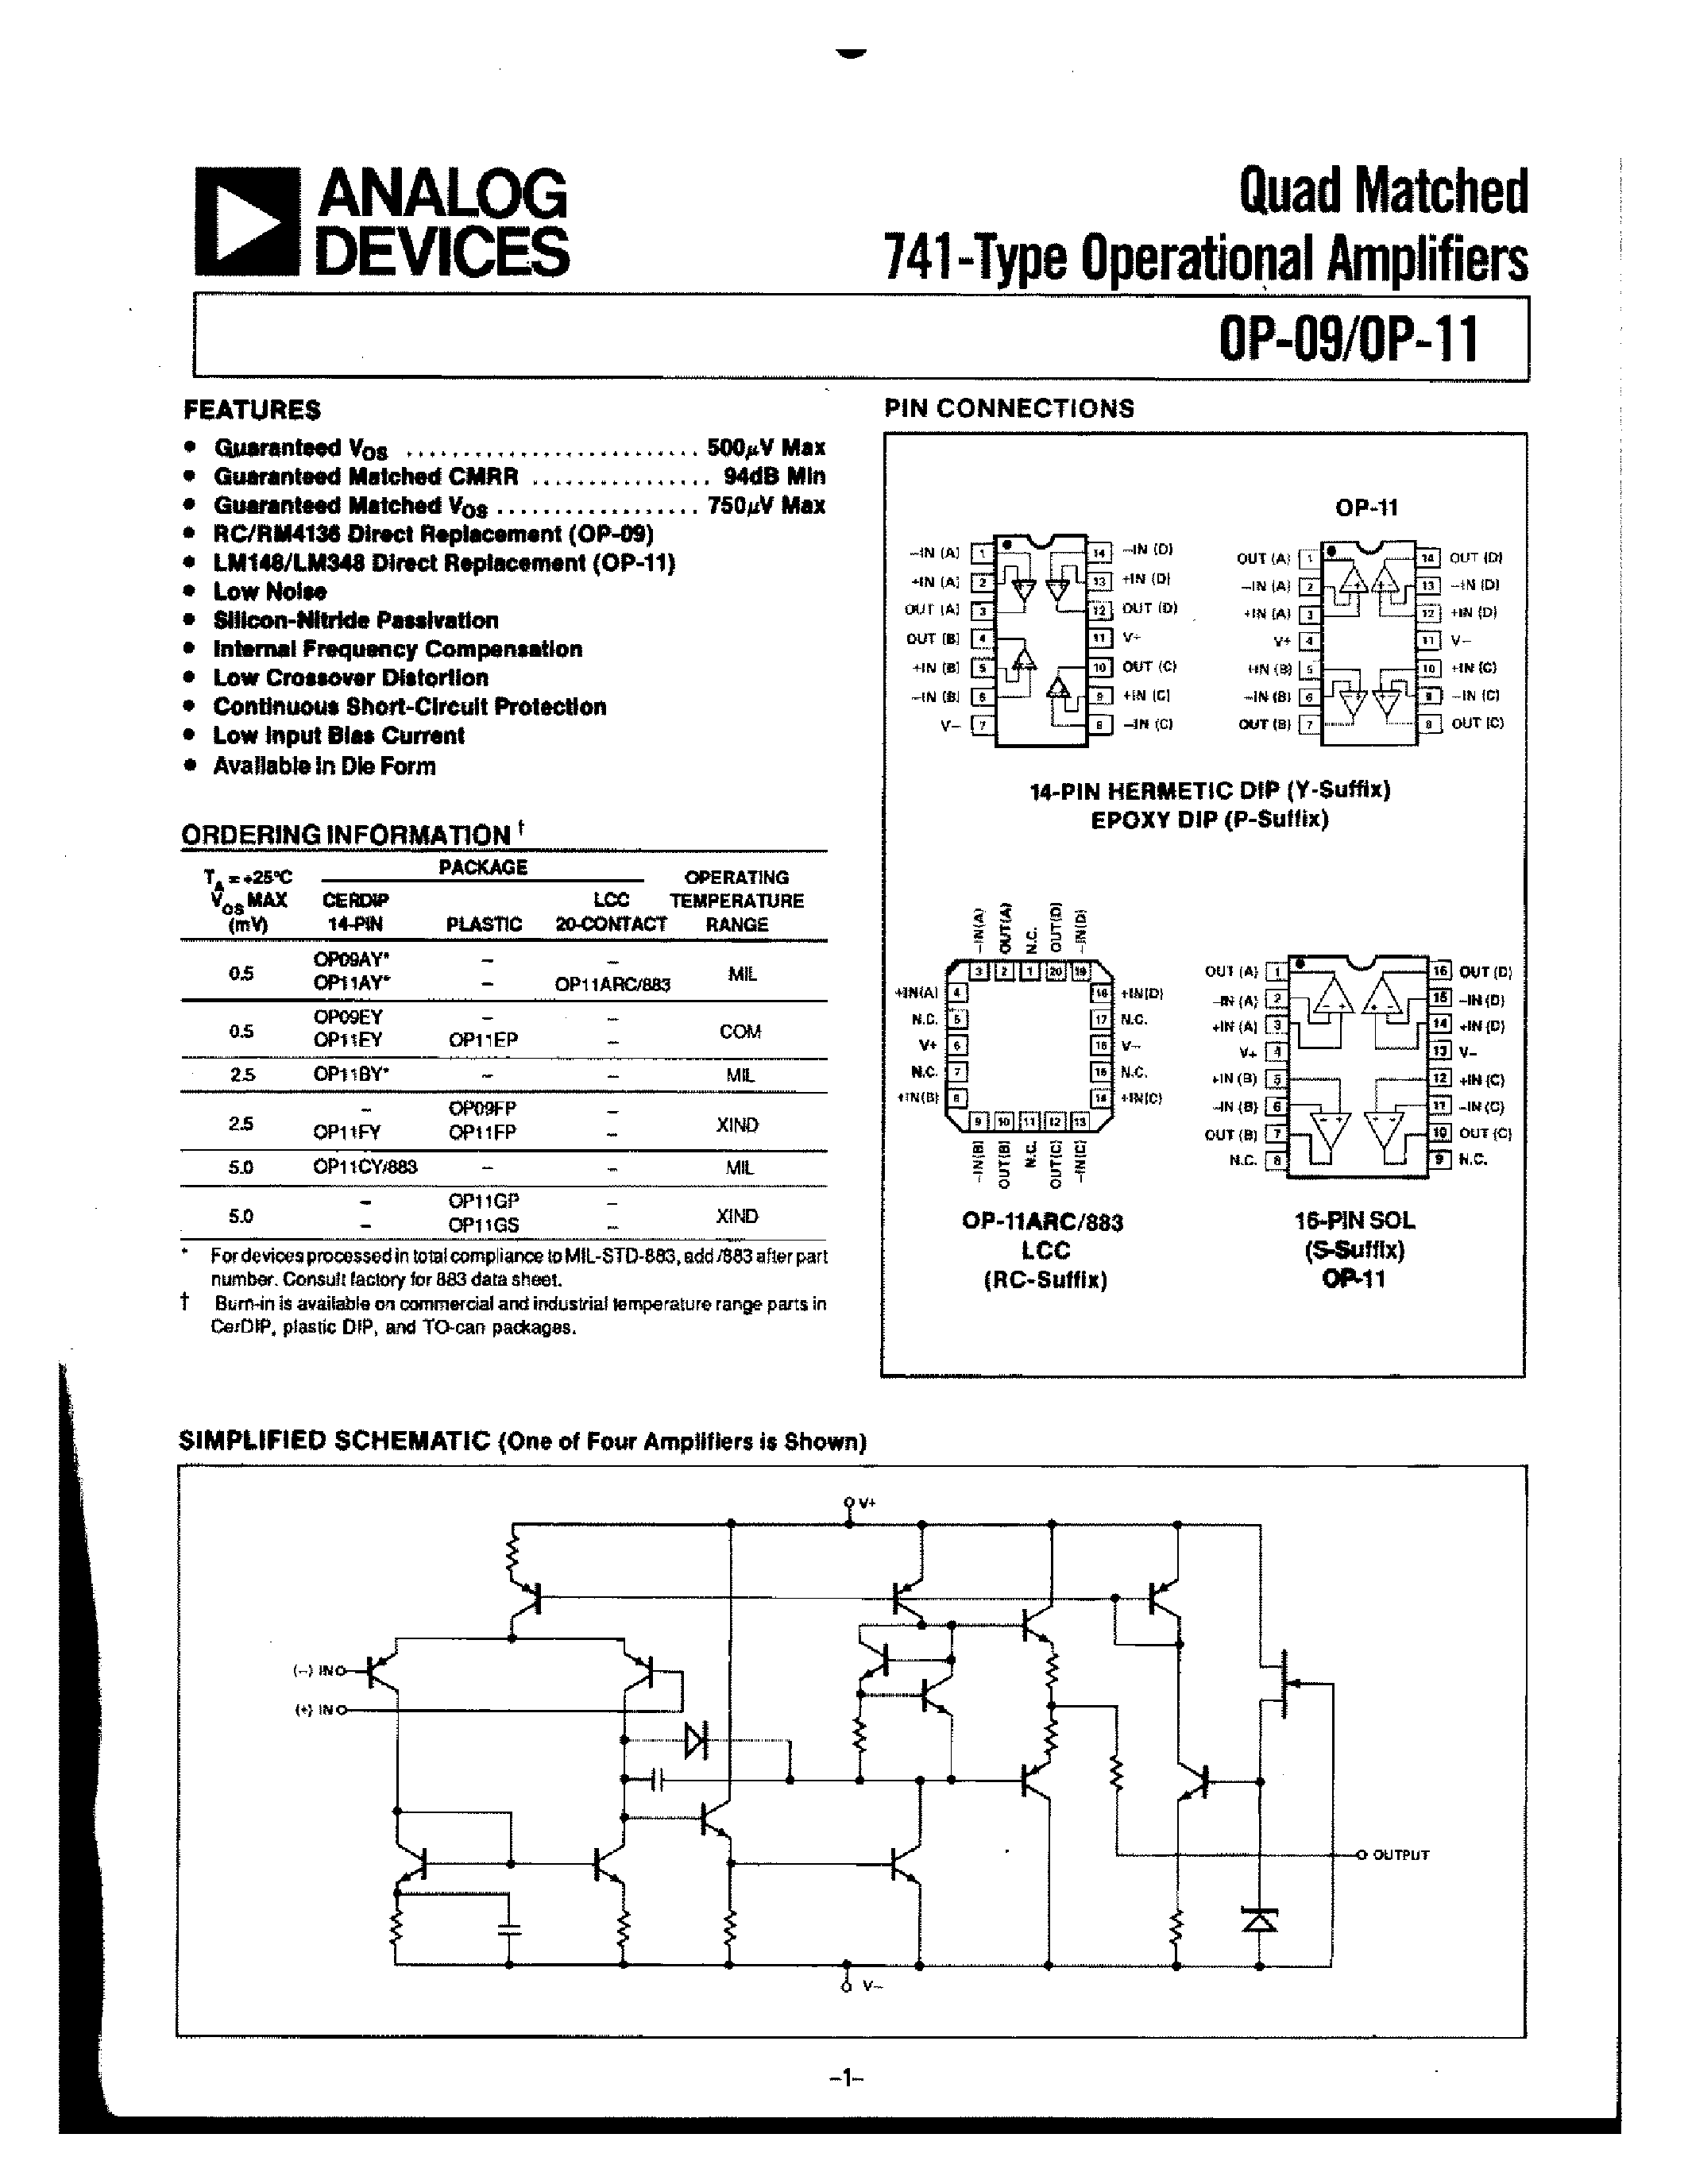 Datasheet OP-11 - Quad Matched 741-Type Operational Amplifiers page 1